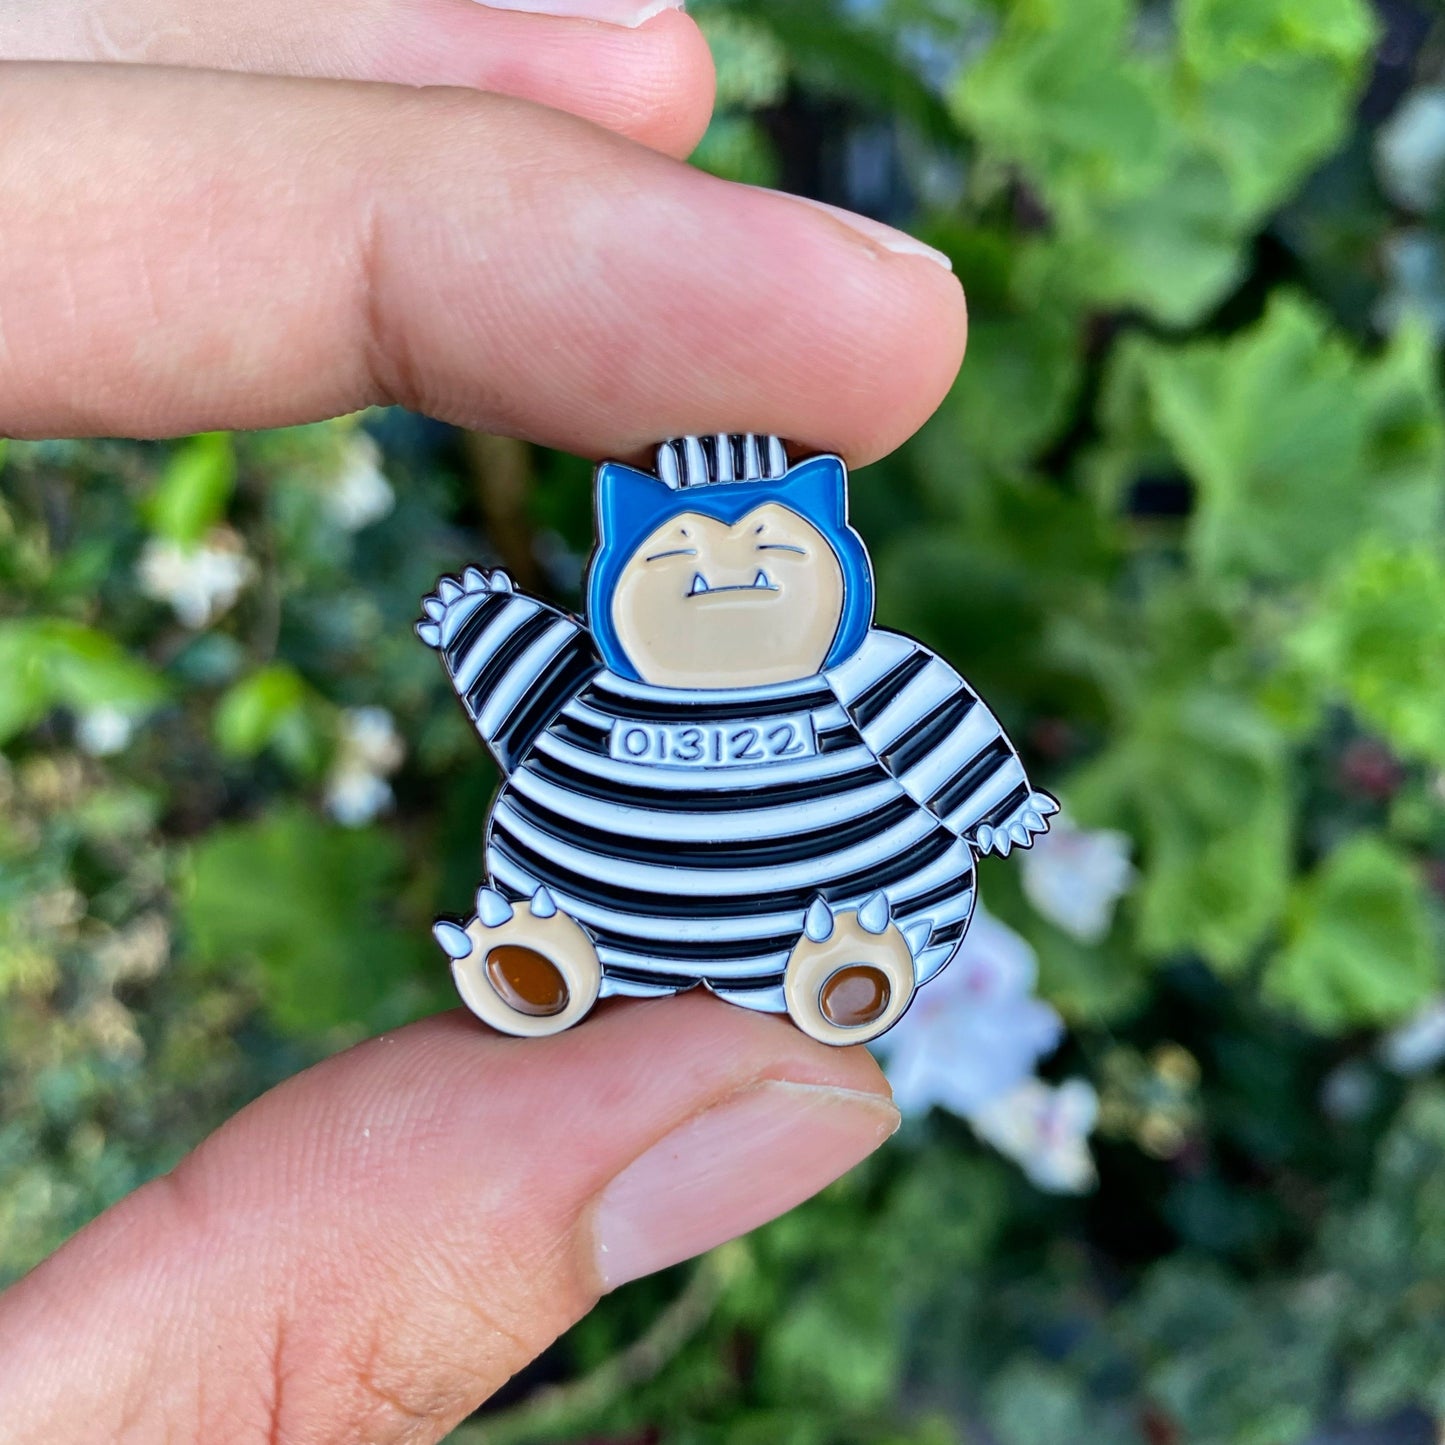 Snorlax Soft Enamel Pin with "013122" text